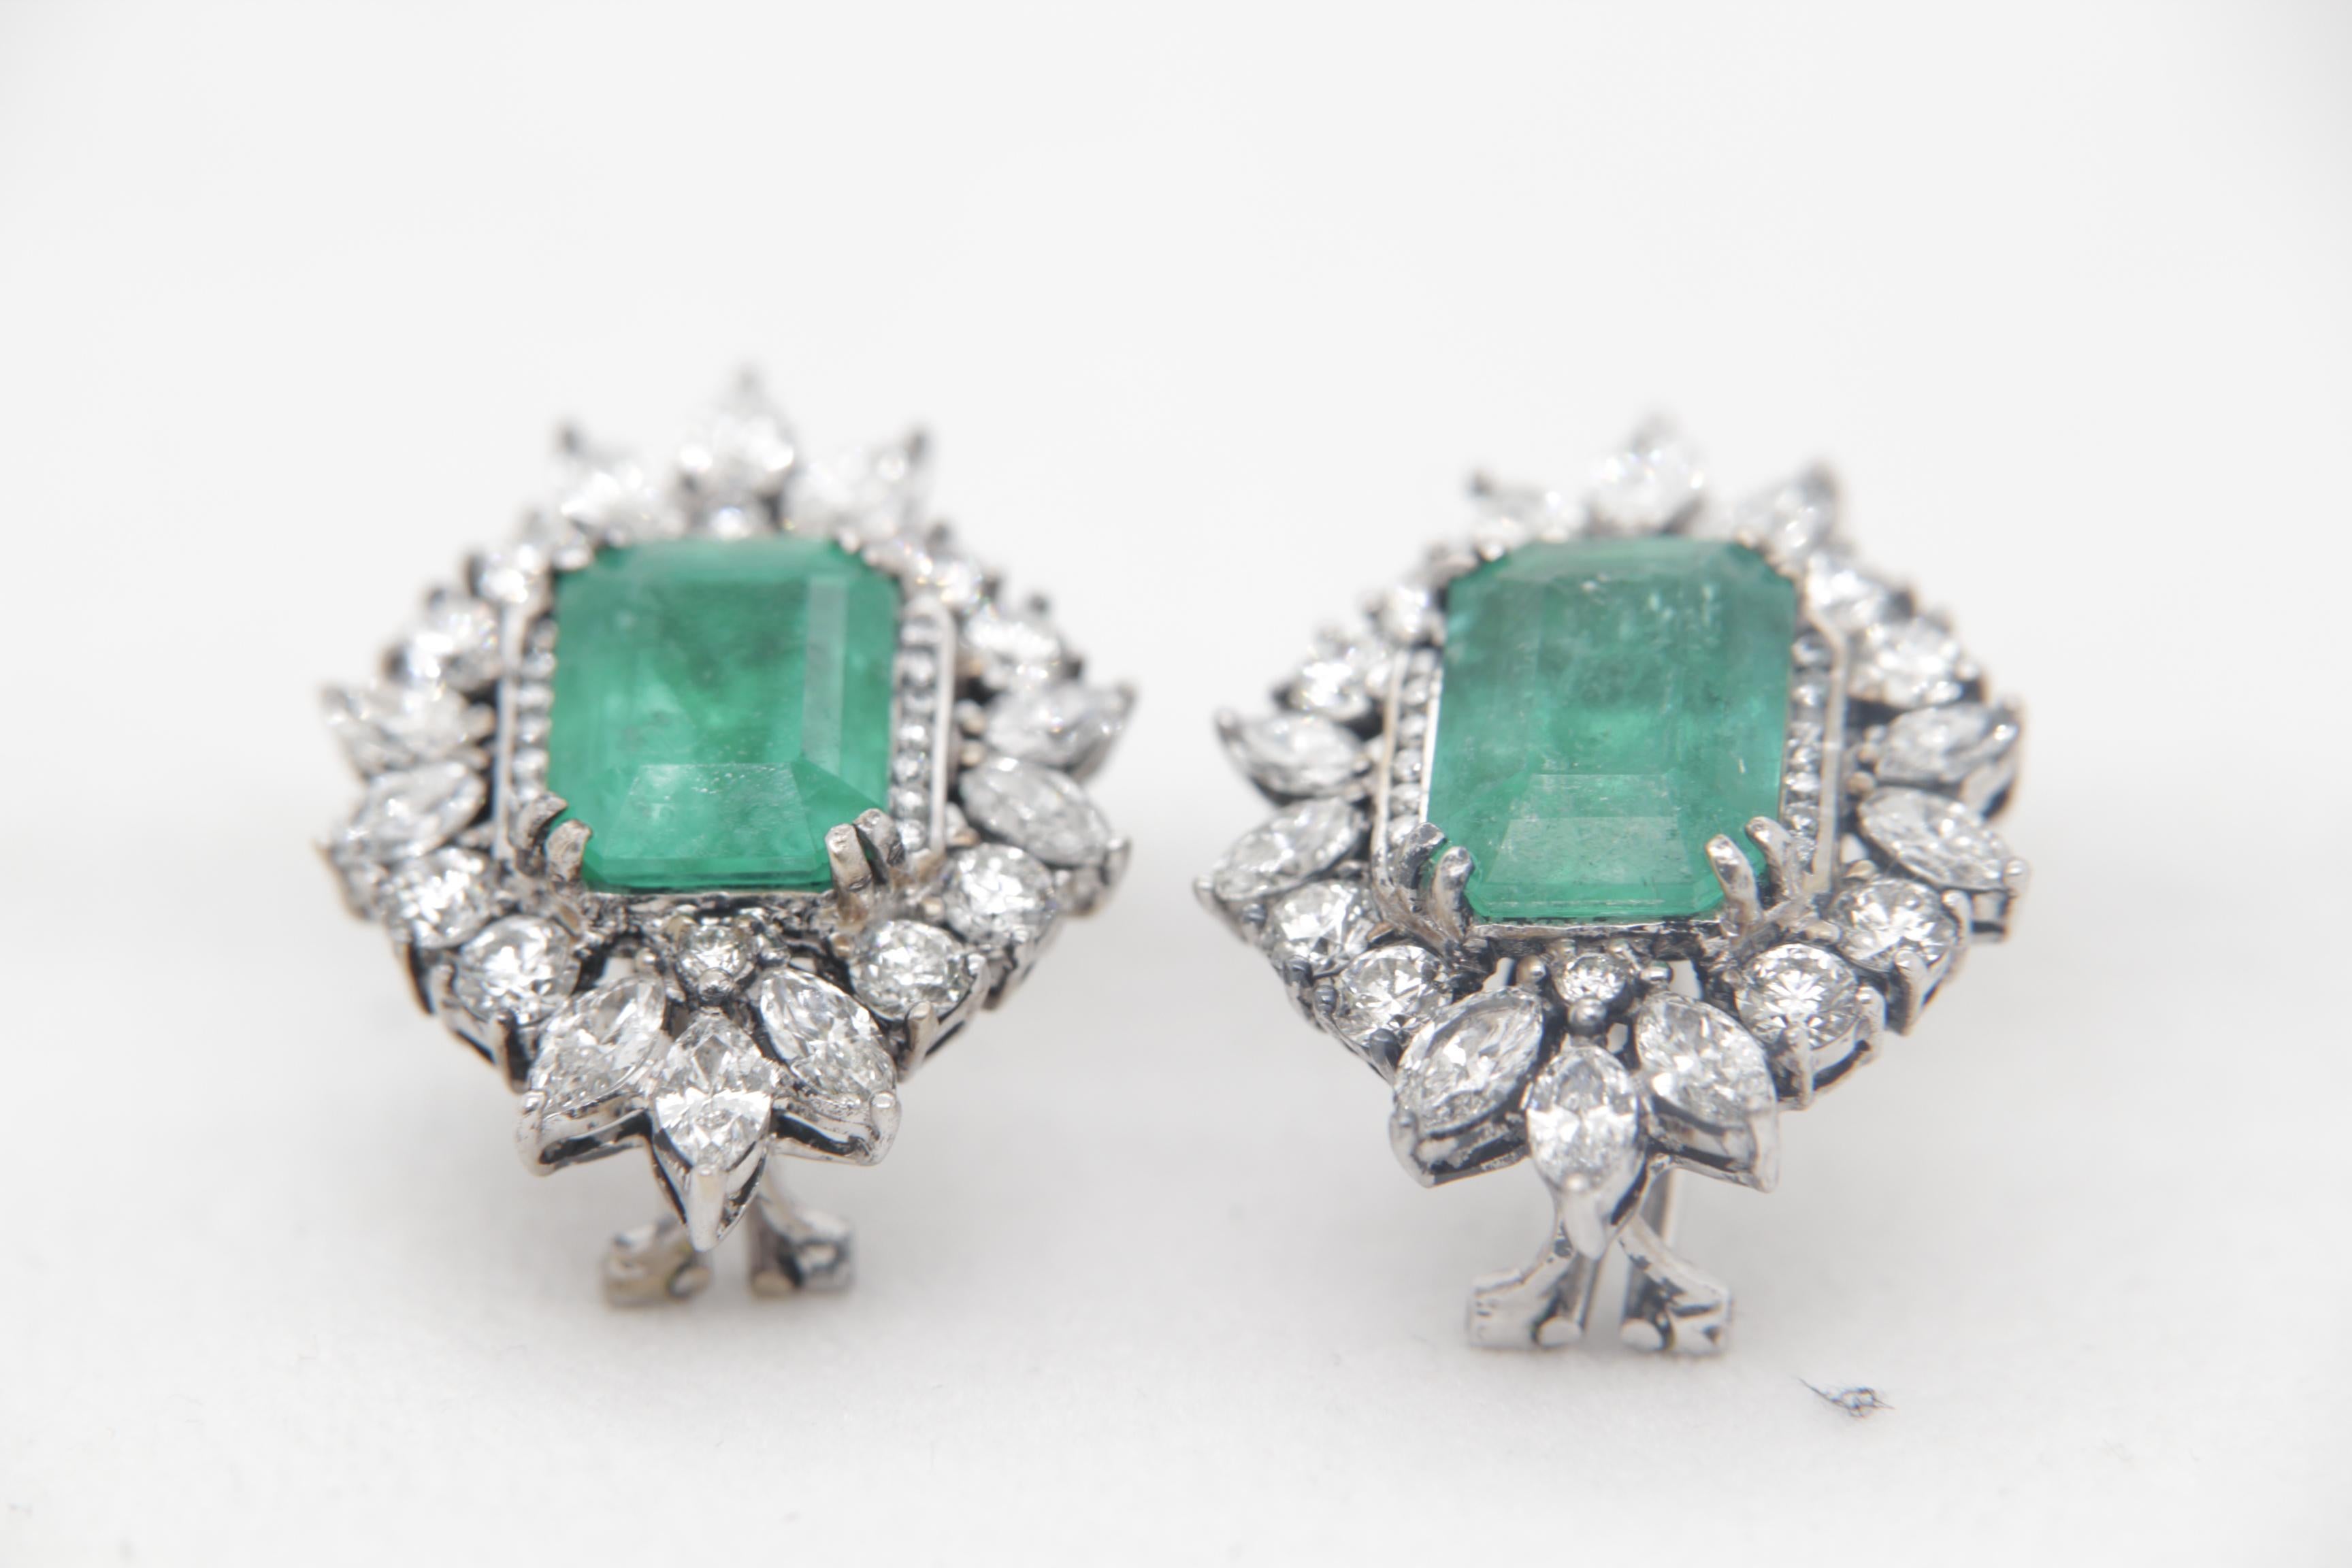 A brand new emerald and diamond earring in 18 karat gold. The total emerald weight is 8.01 carats and are certified from GIM (Gemological Institute of Myanmar) as natural and colombian. The total diamond weight is 3.61 carats and total earring